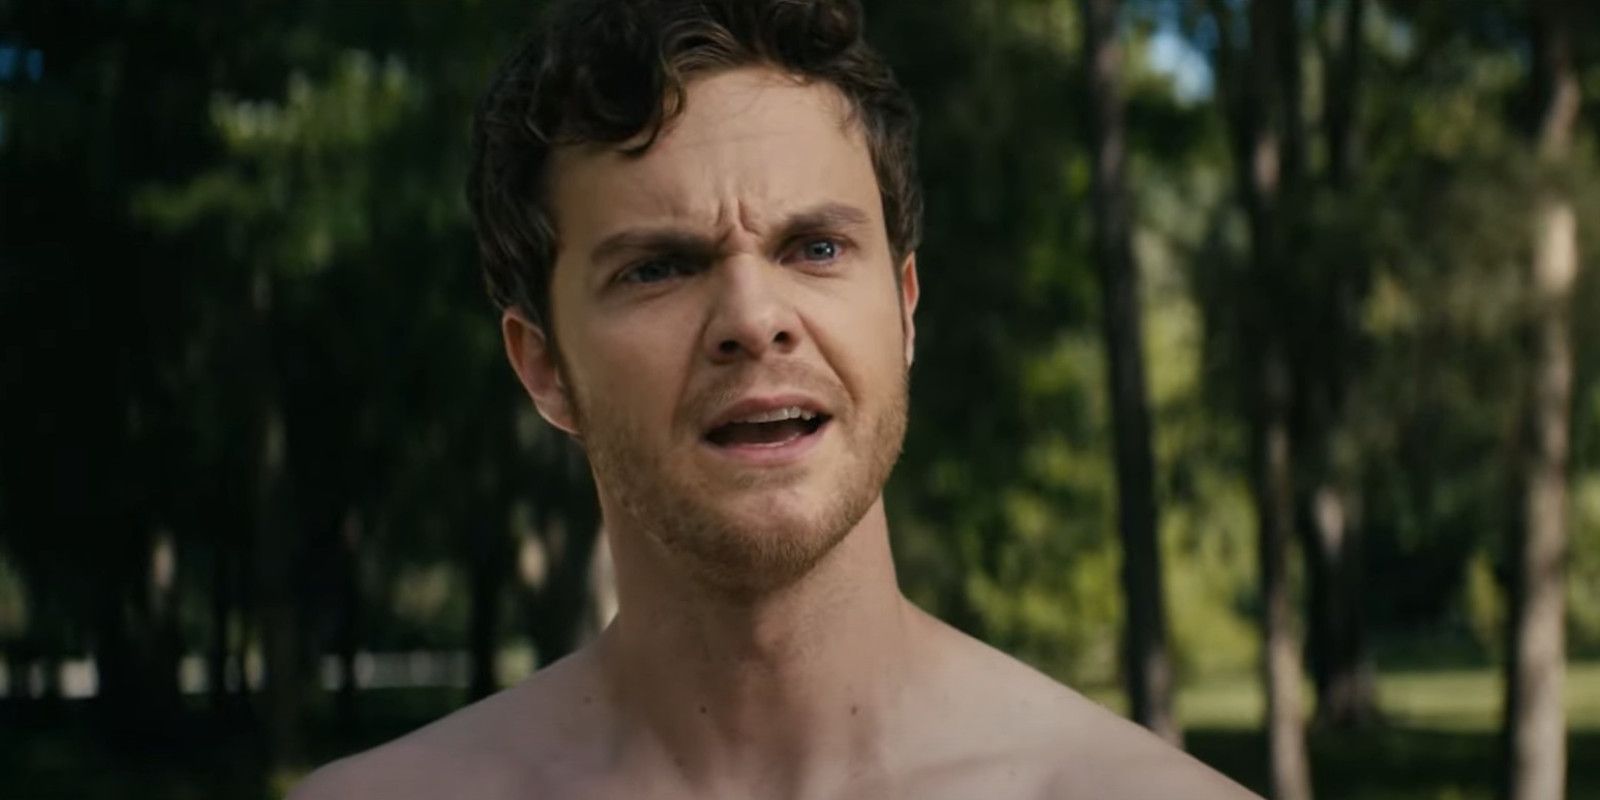 Jack Quaid as Hughie looking angry in The Boys